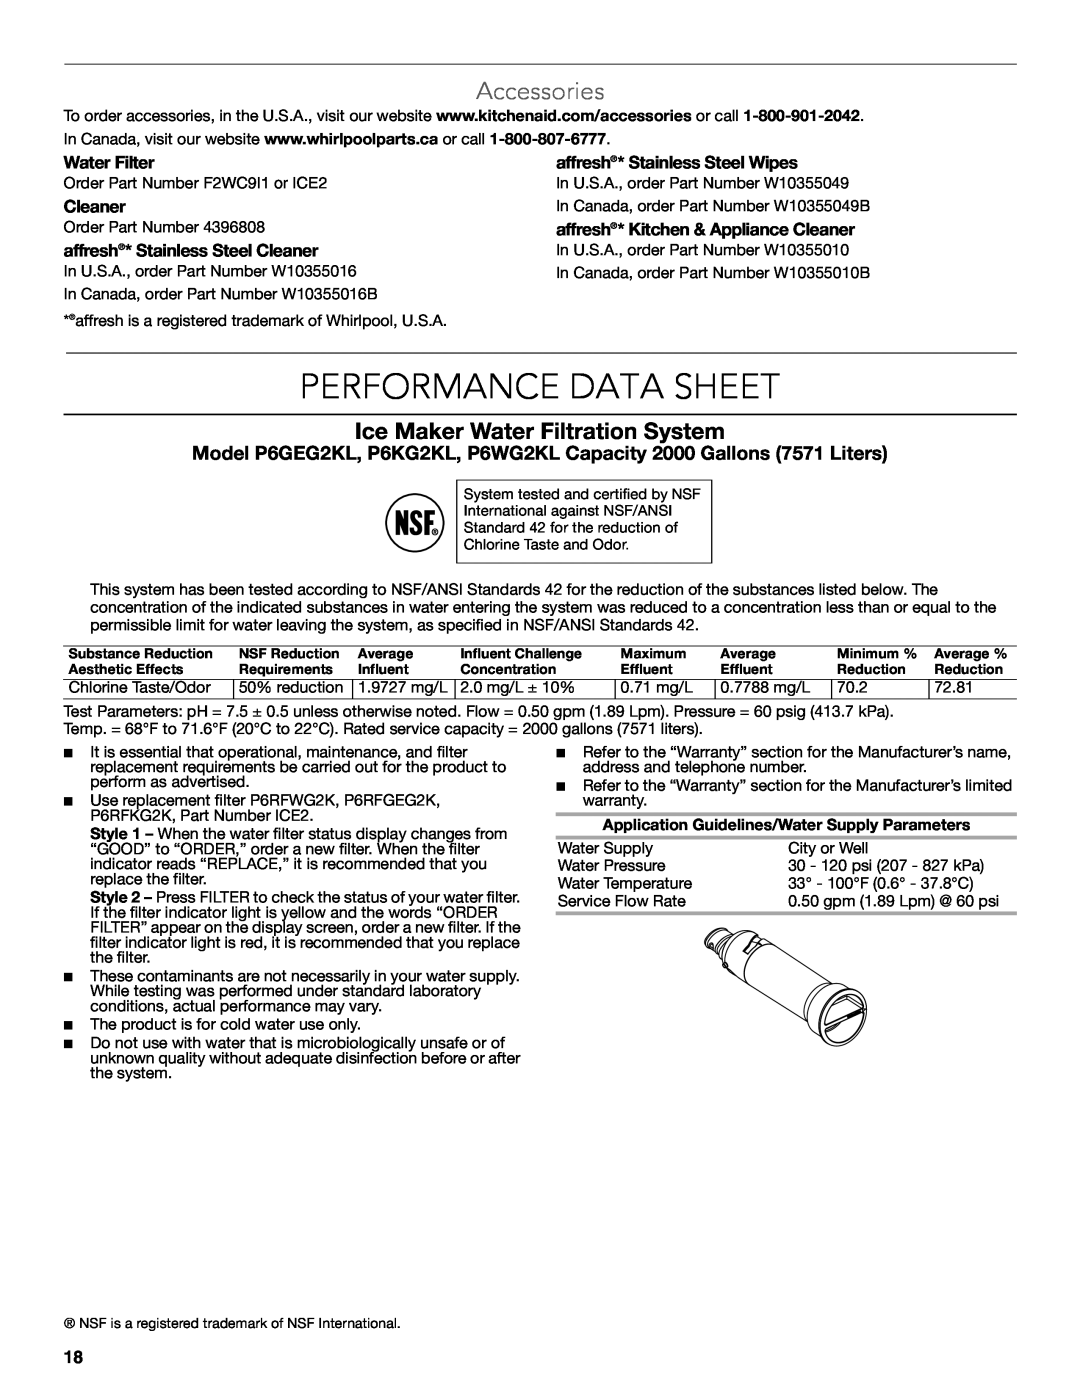 KitchenAid W10515677C Performance Data Sheet, Accessories, Ice Maker Water Filtration System, Water Filter, Cleaner, 70.2 